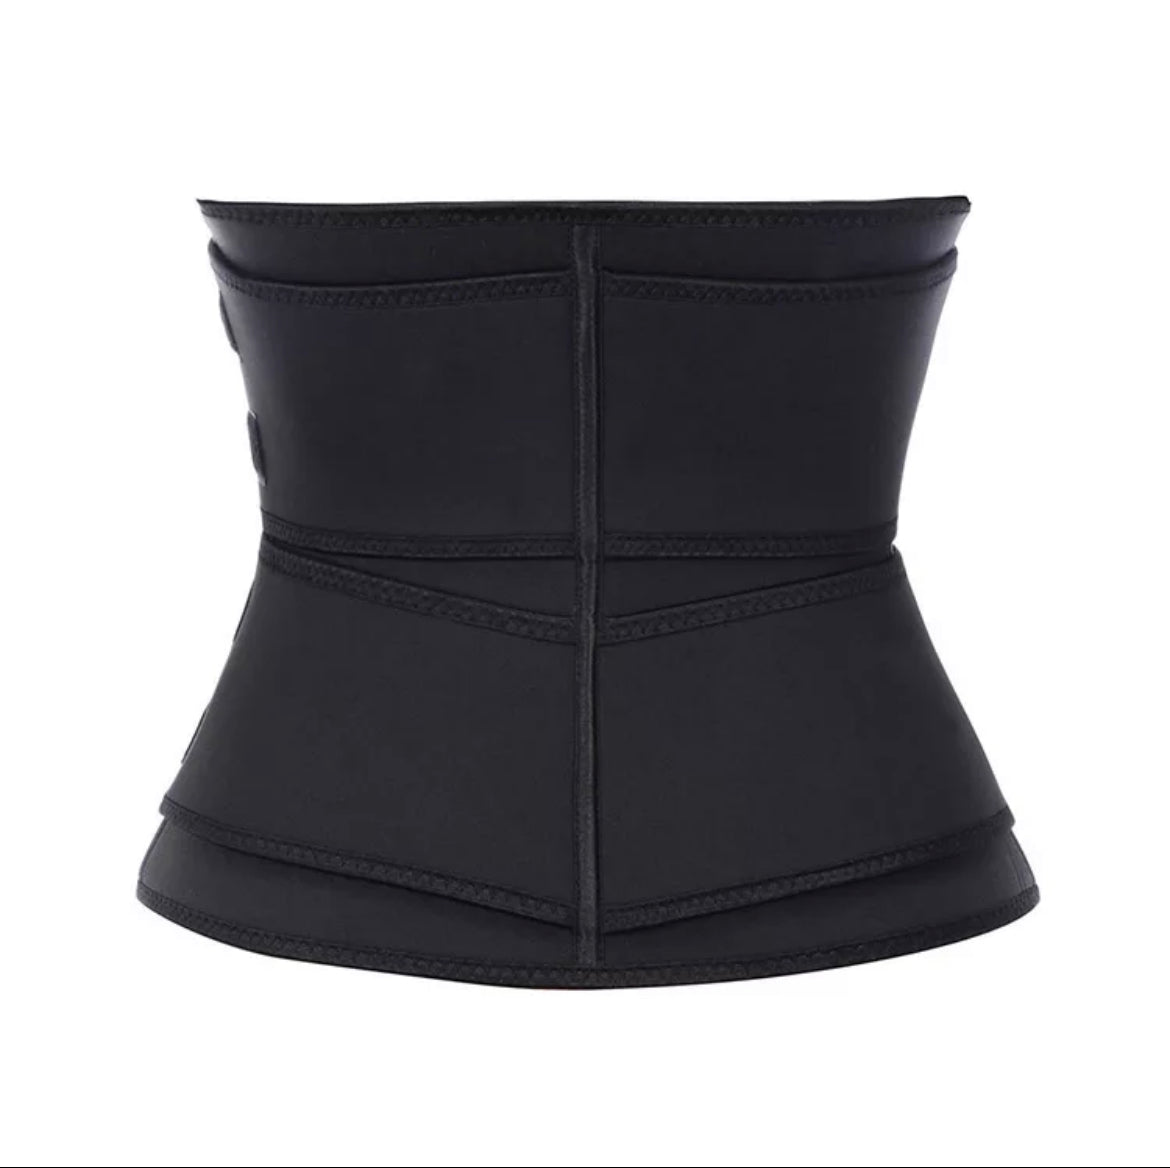 The Fupa Be Gone Waist Trainer,2023 New Fupa Control Shapewear,Fupa Be Gone  Waist Trainer for Women (M, Pink)